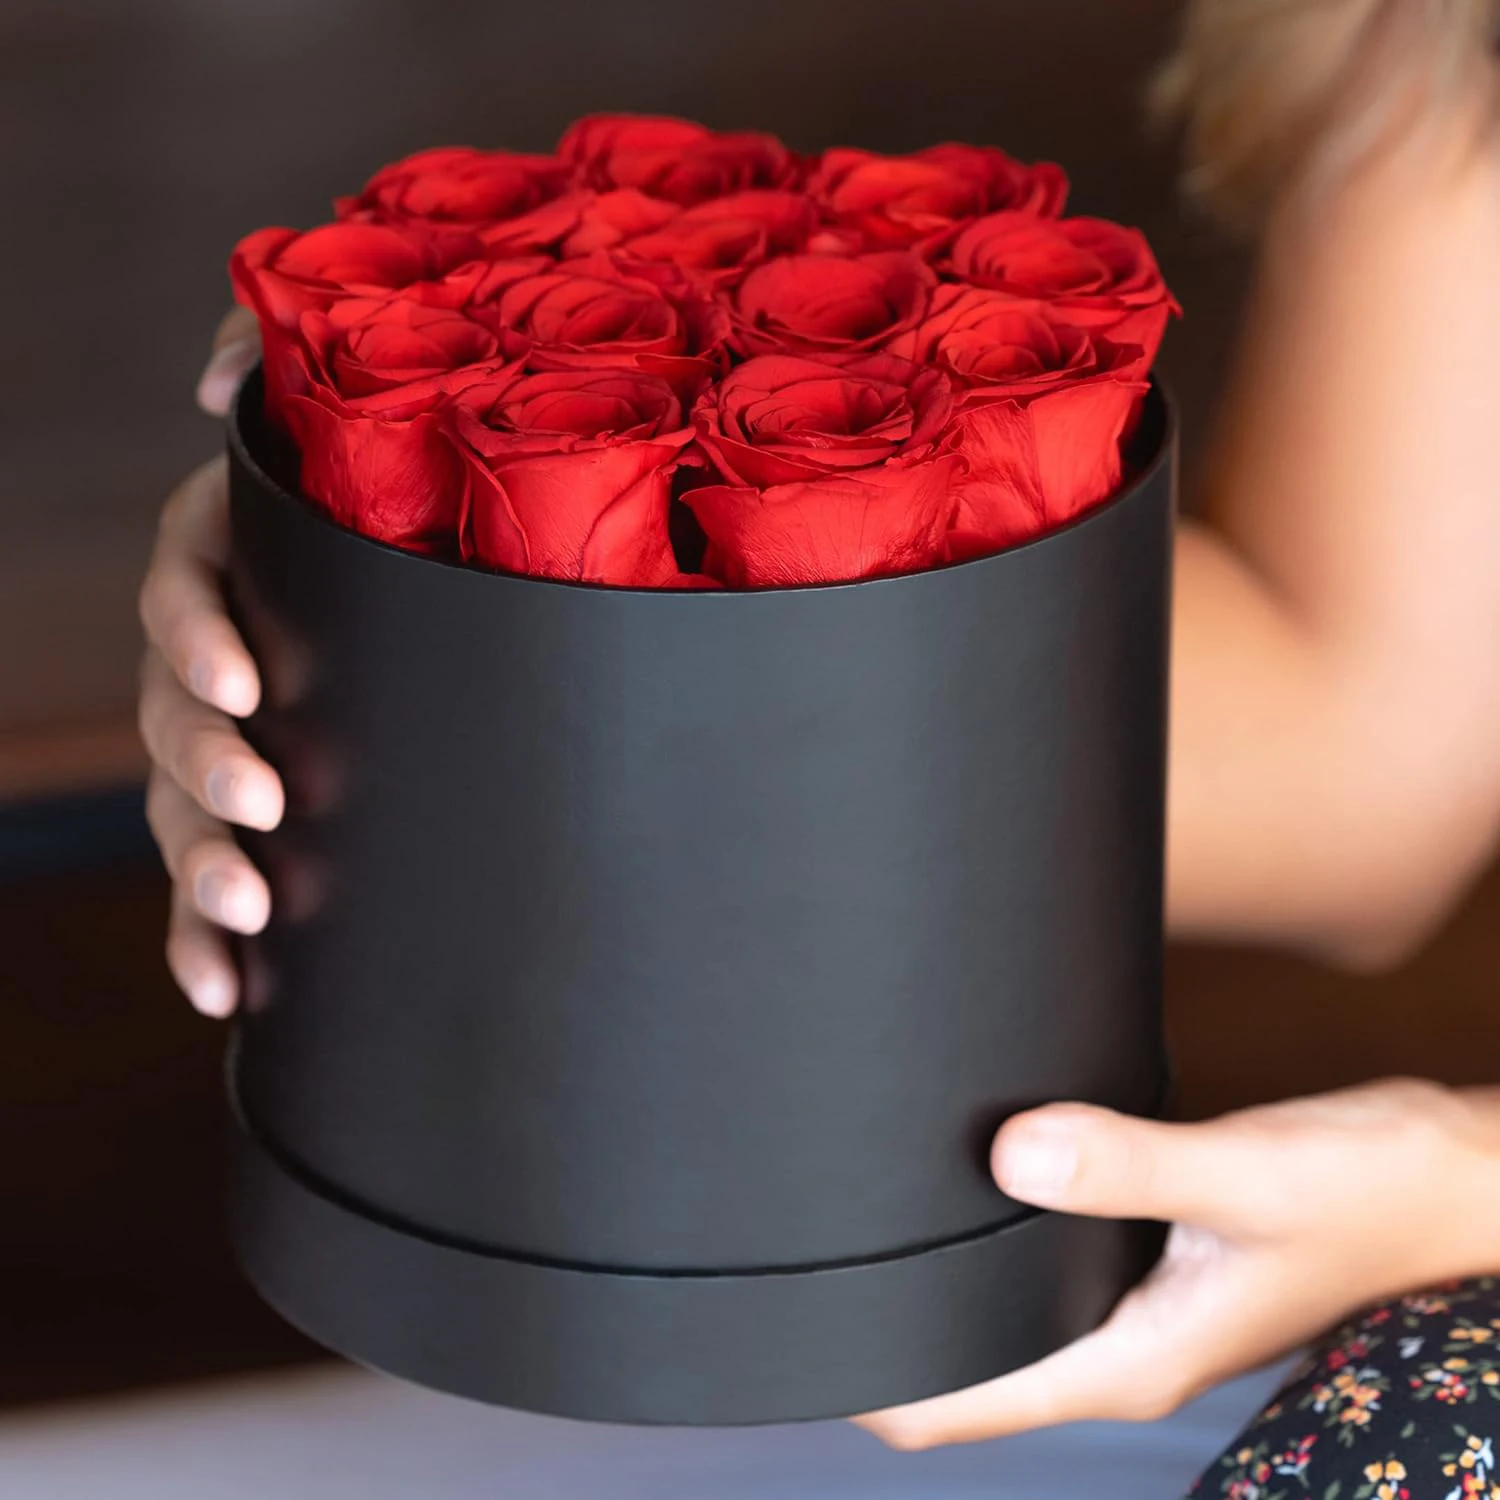 

12PCS Natural Rose in Round Box Handmade Preserved Rose Eternal Life Real Rose Perfect for Mothers Day Anniversary Birthday Gift